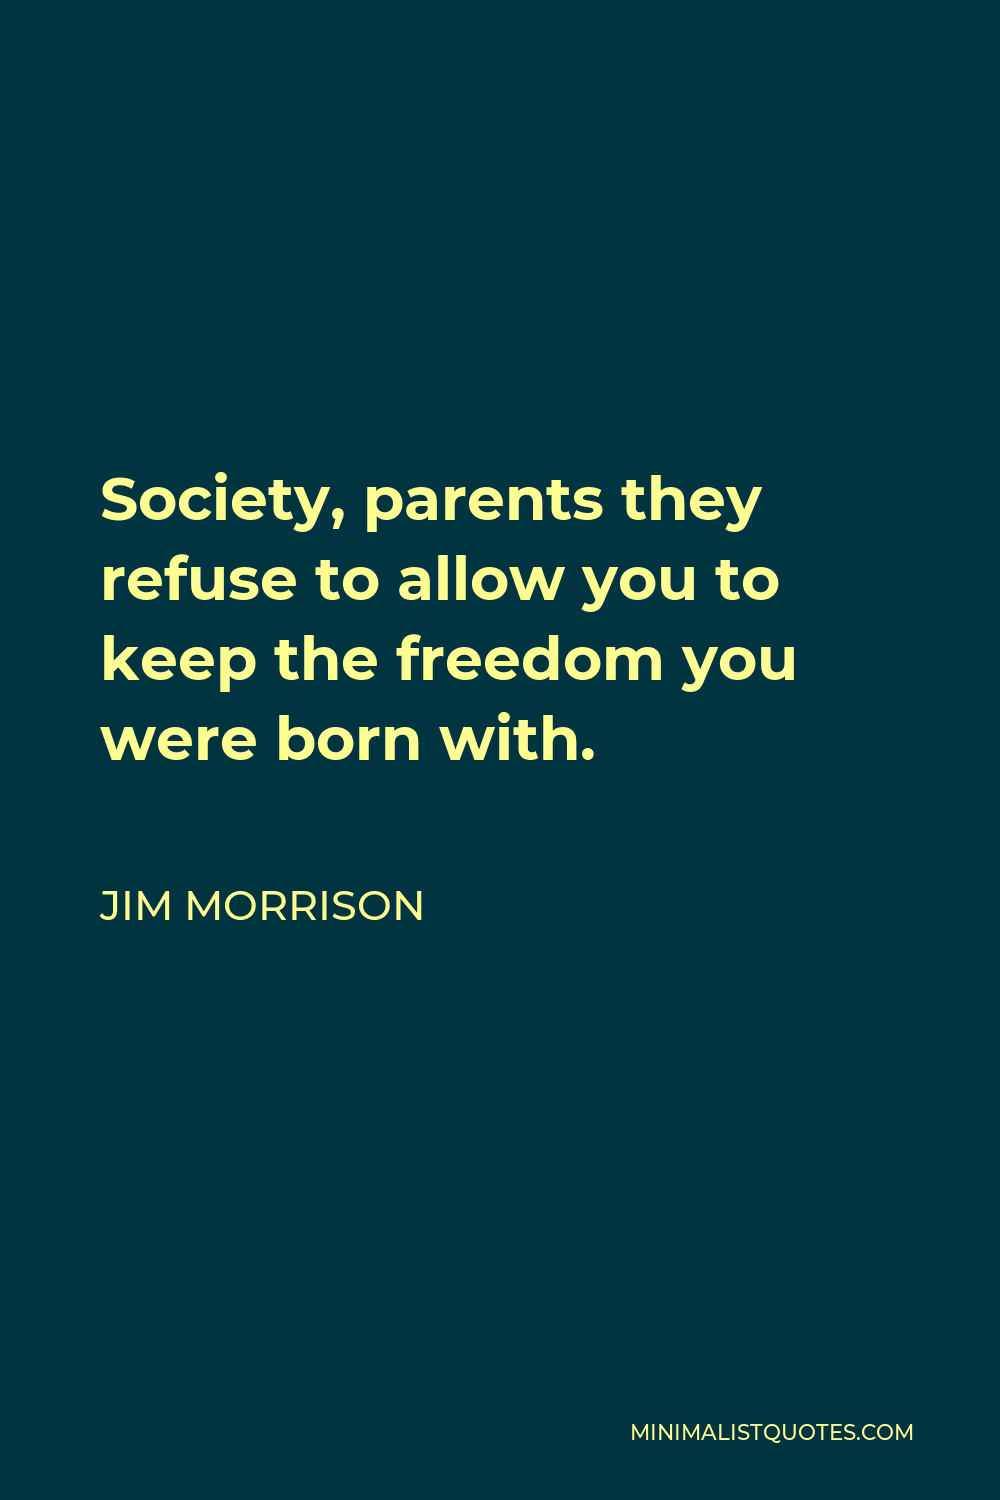 Jim Morrison Quote - Society, parents they refuse to allow you to keep the freedom you were born with.